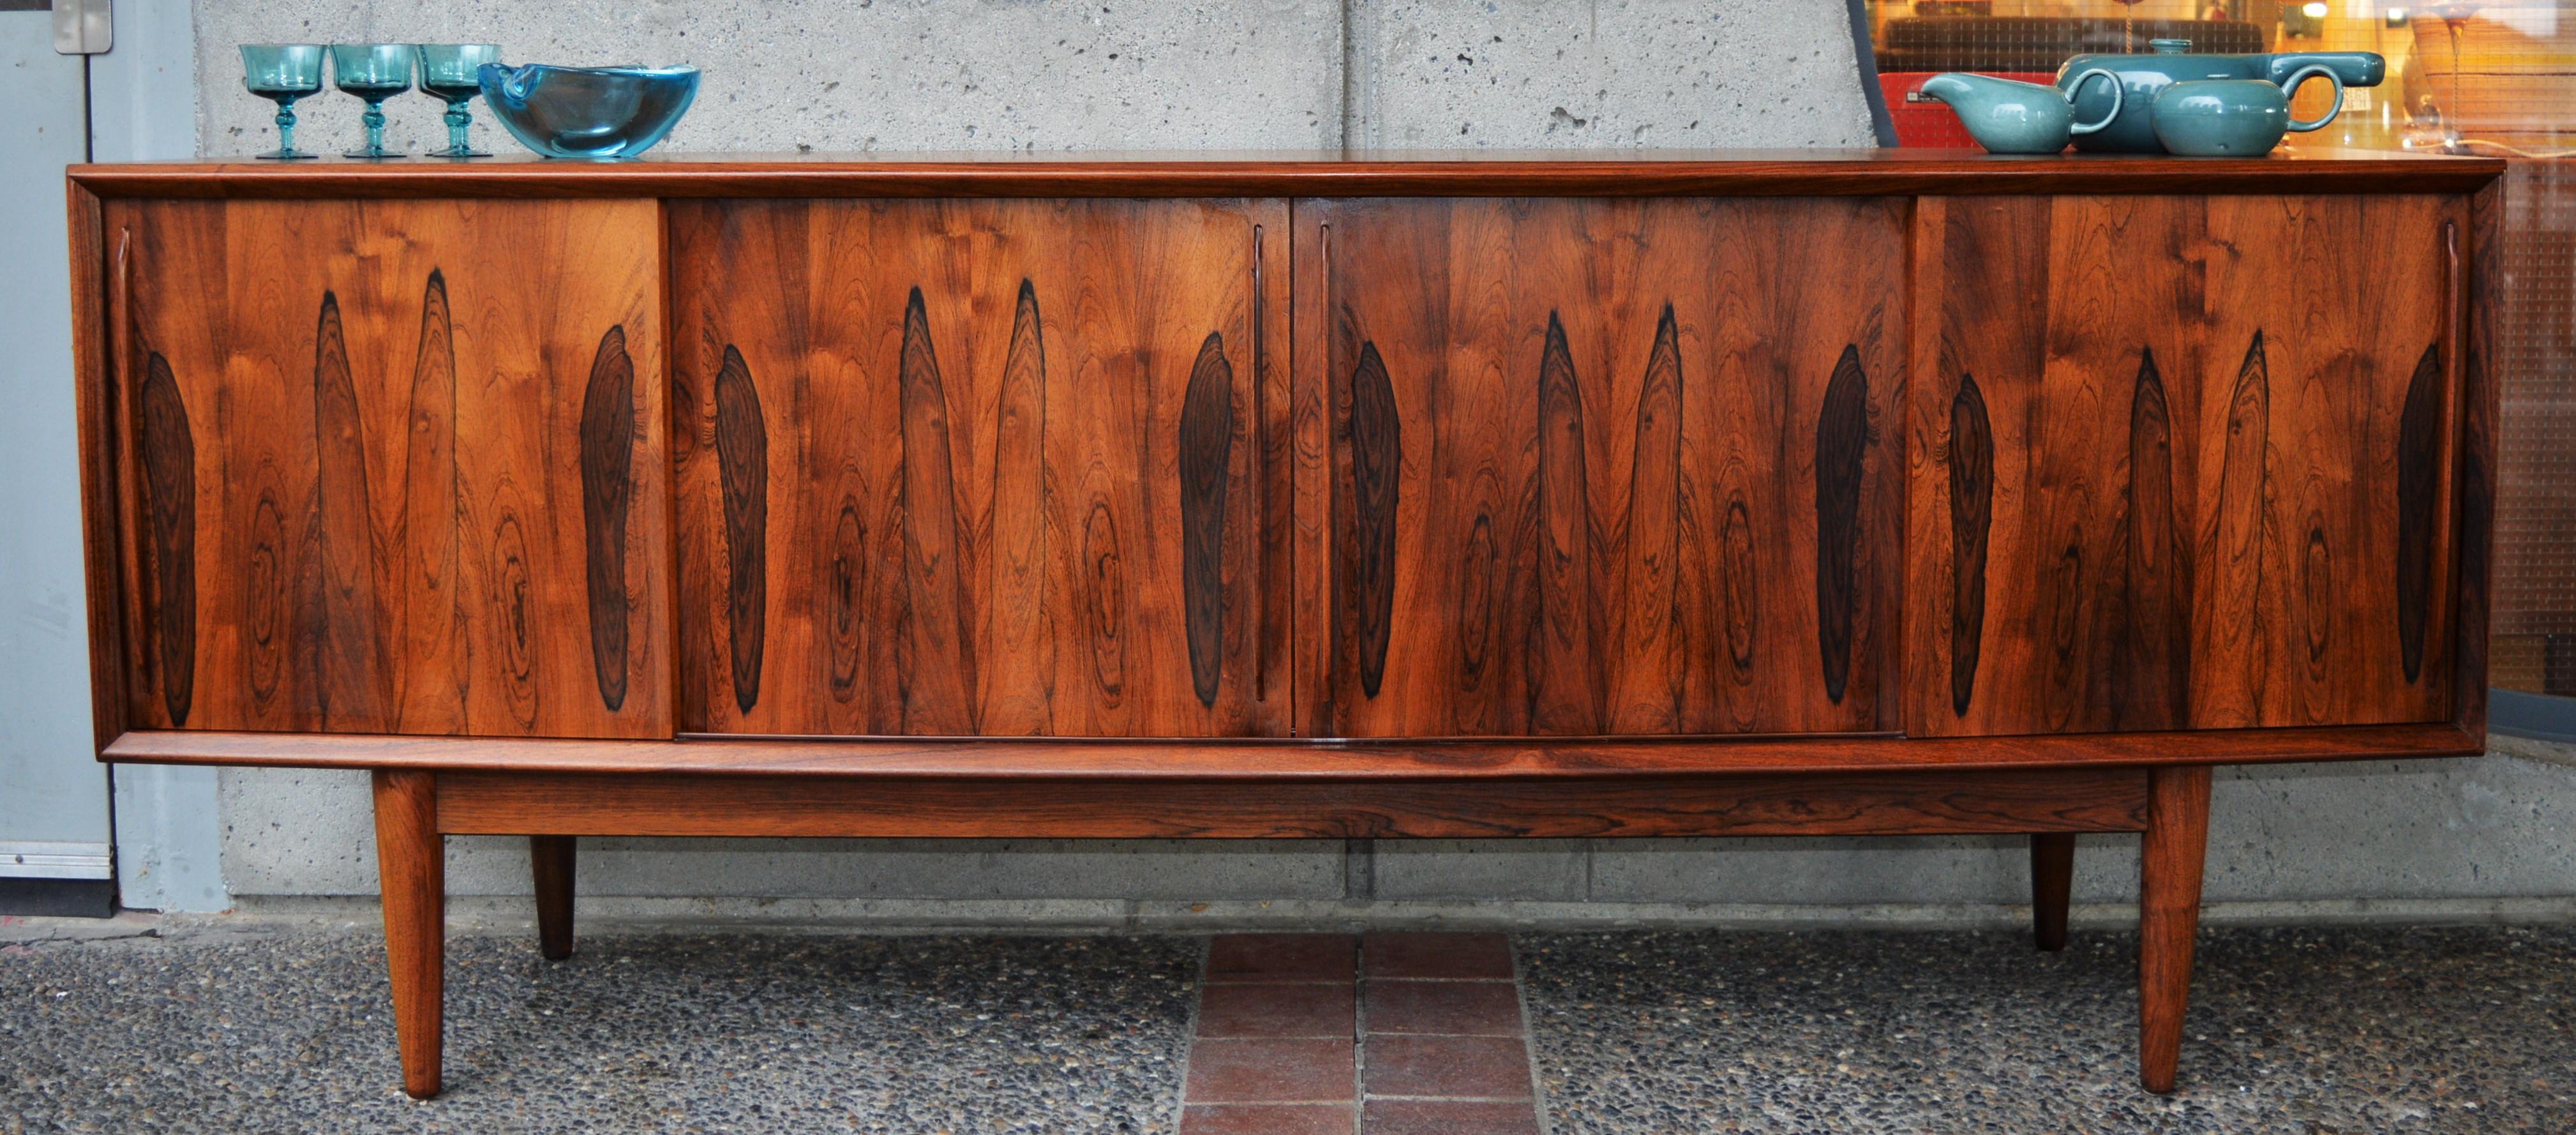 This stunning Danish modern rosewood credenza / buffet by Arne Vodder for H.P. Hansen has gorgeous, classical lines with it's beautiful arced bow-front. Internally, the components are teak, a wonderful contrast to the rosewood with two adjustable